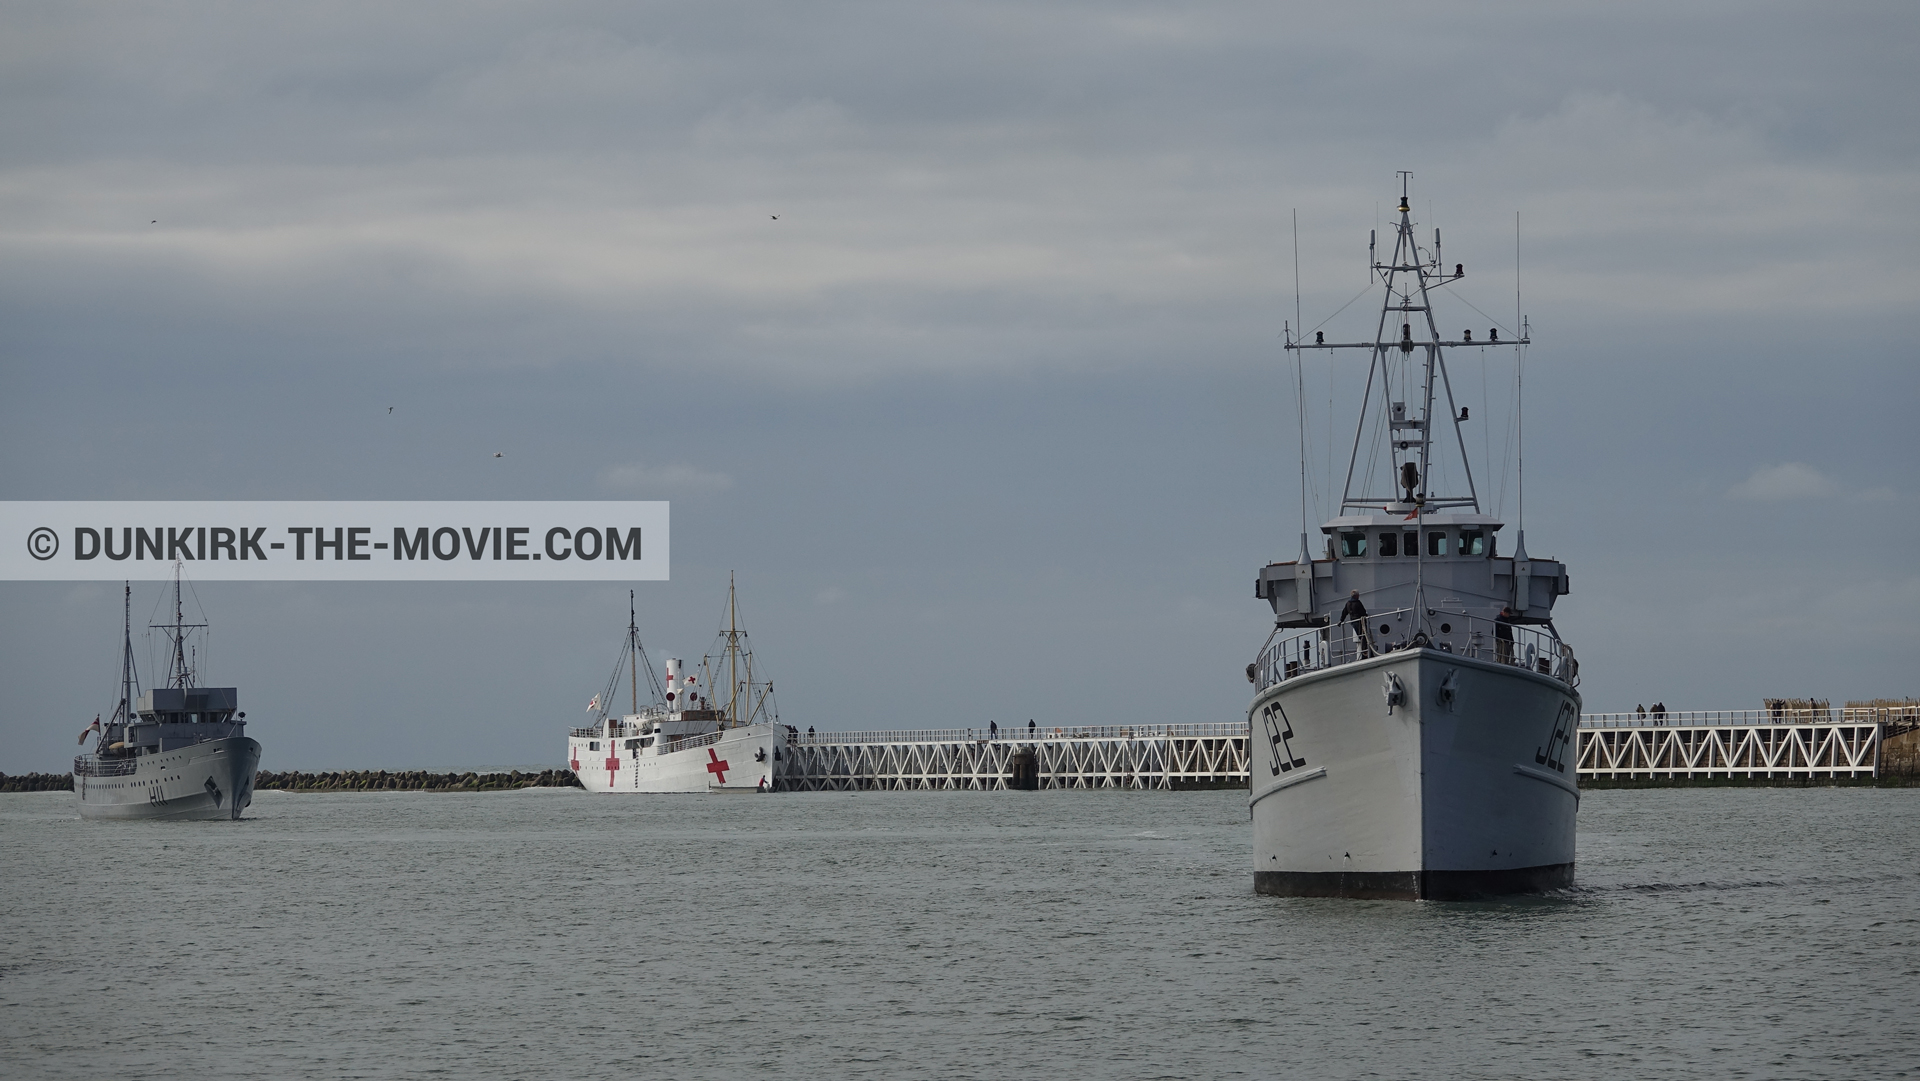 Picture with boat, cloudy sky, H11 - MLV Castor, J22 -Hr.Ms. Naaldwijk, EST pier, calm sea, M/S Rogaland,  from behind the scene of the Dunkirk movie by Nolan